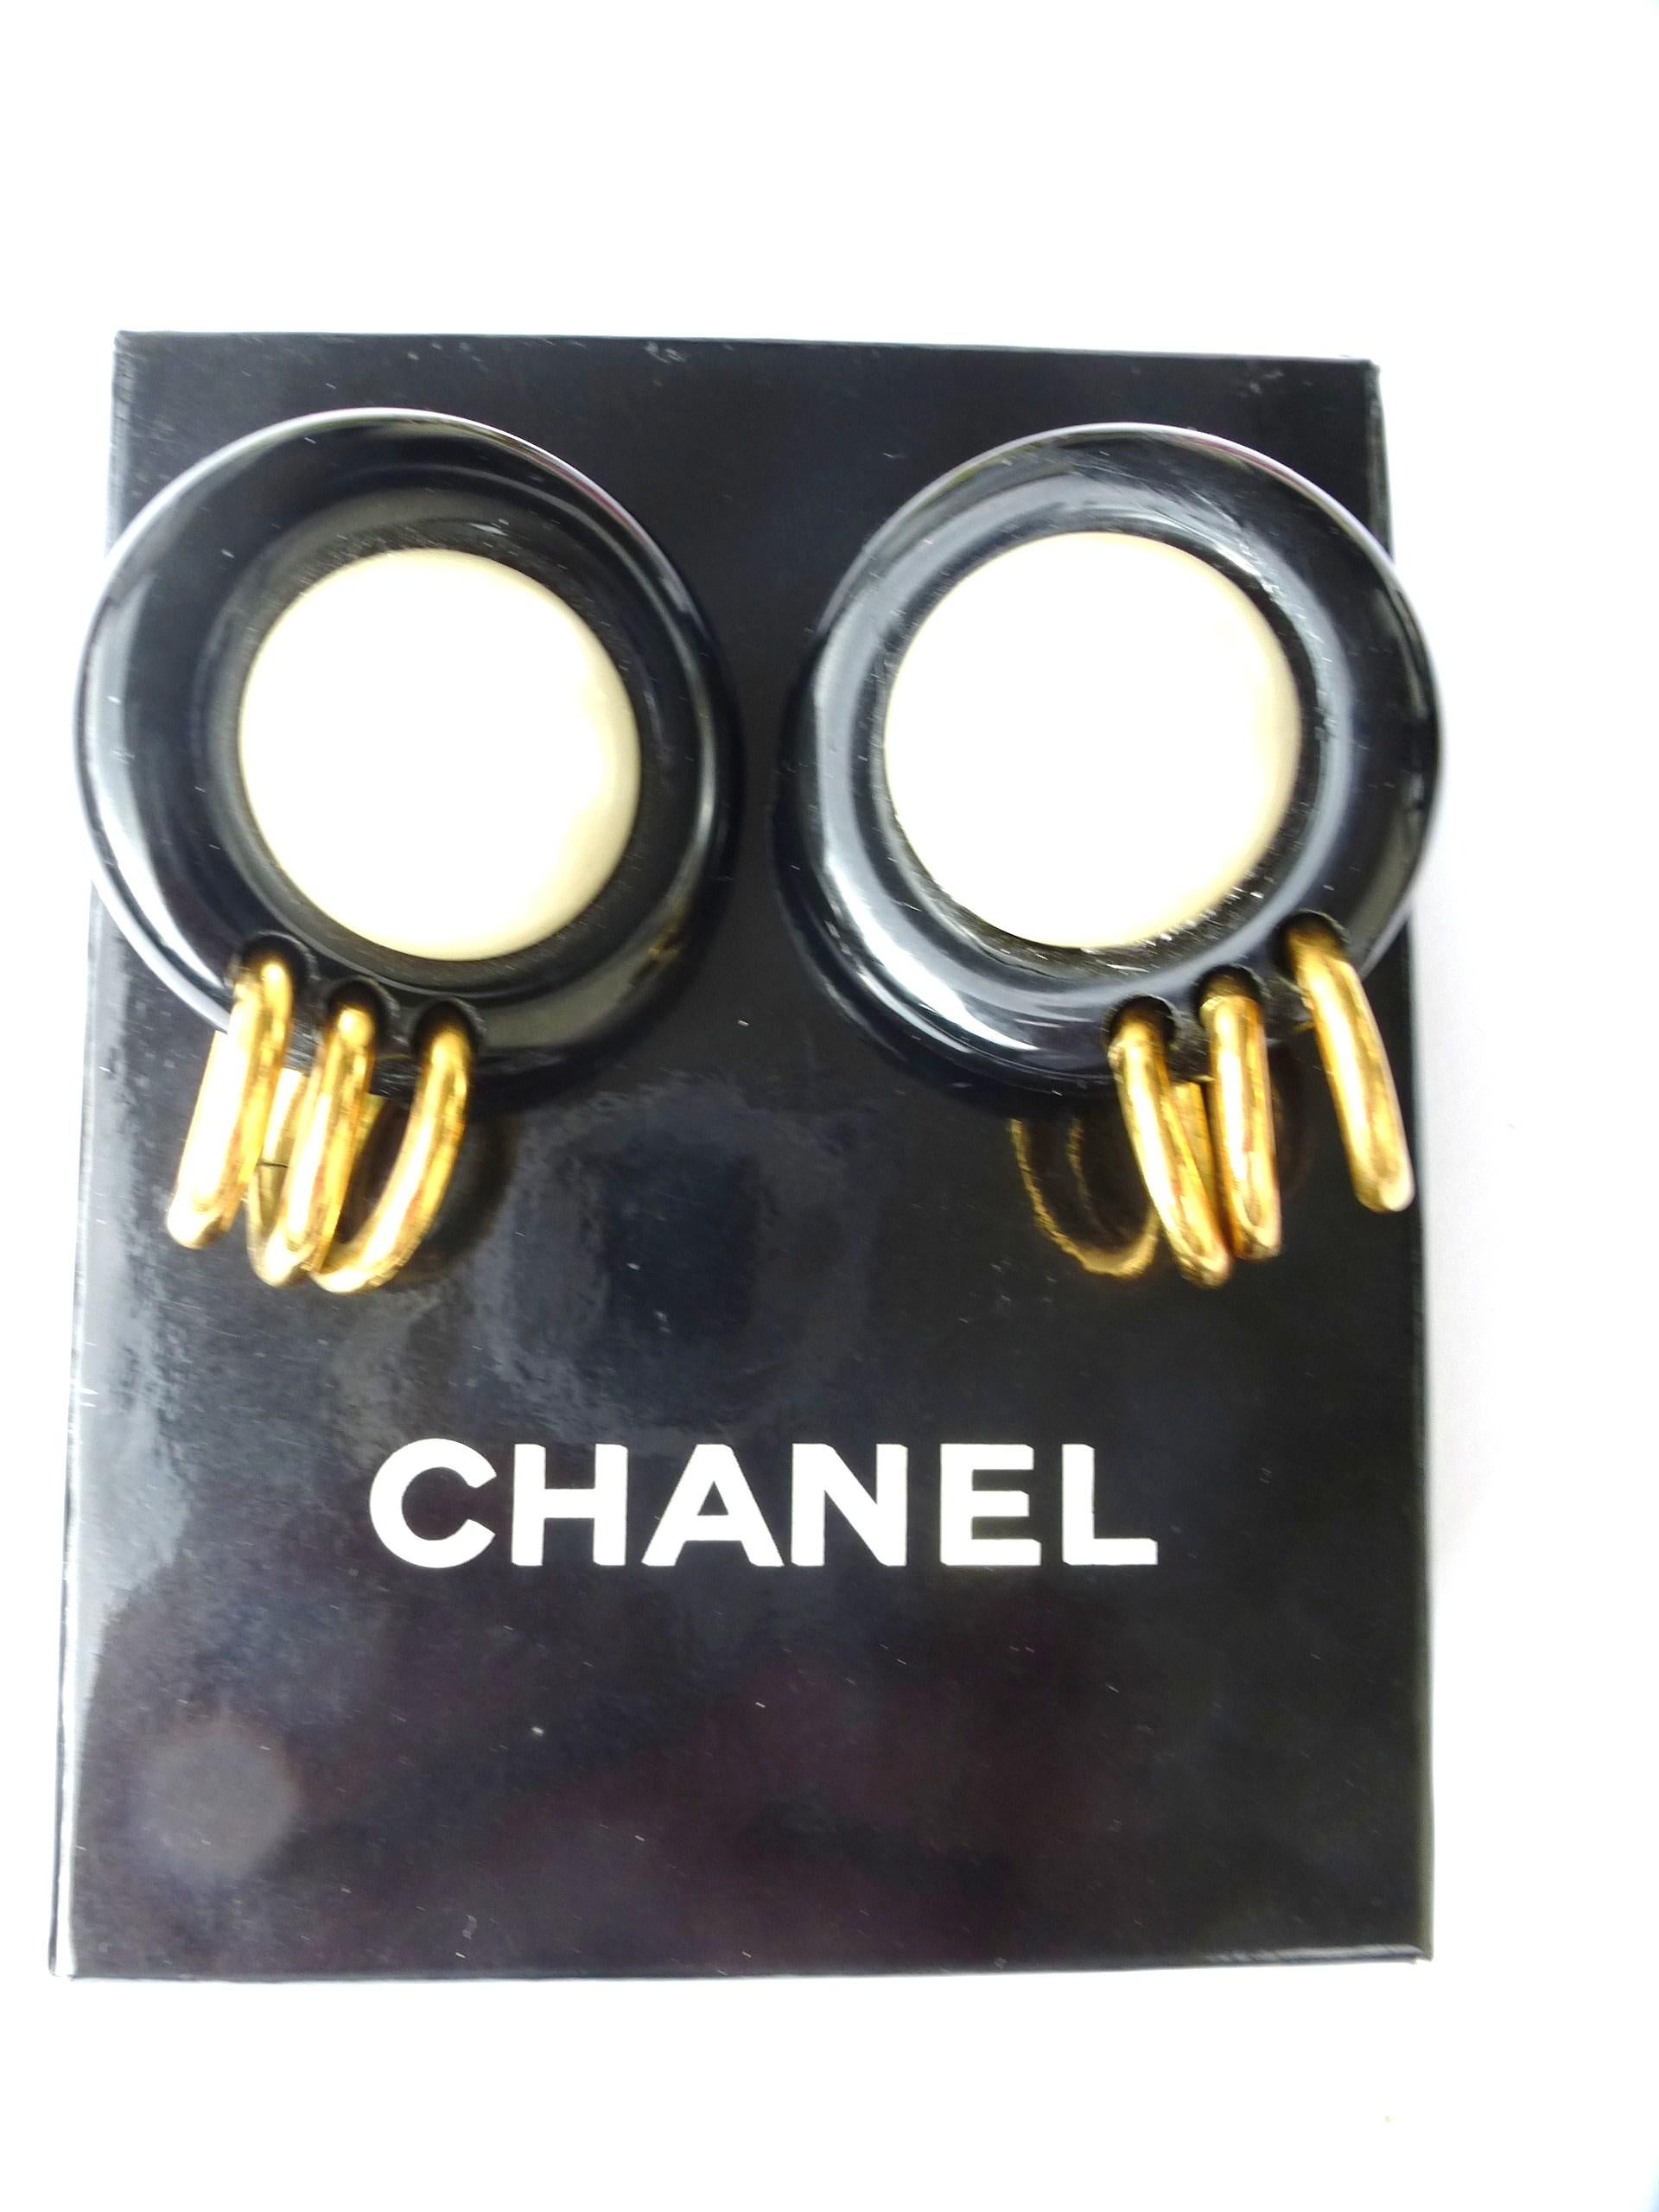 CHANEL clip-on earring, black with large handmade pearl by V. de Castellane 2CC8 For Sale 1